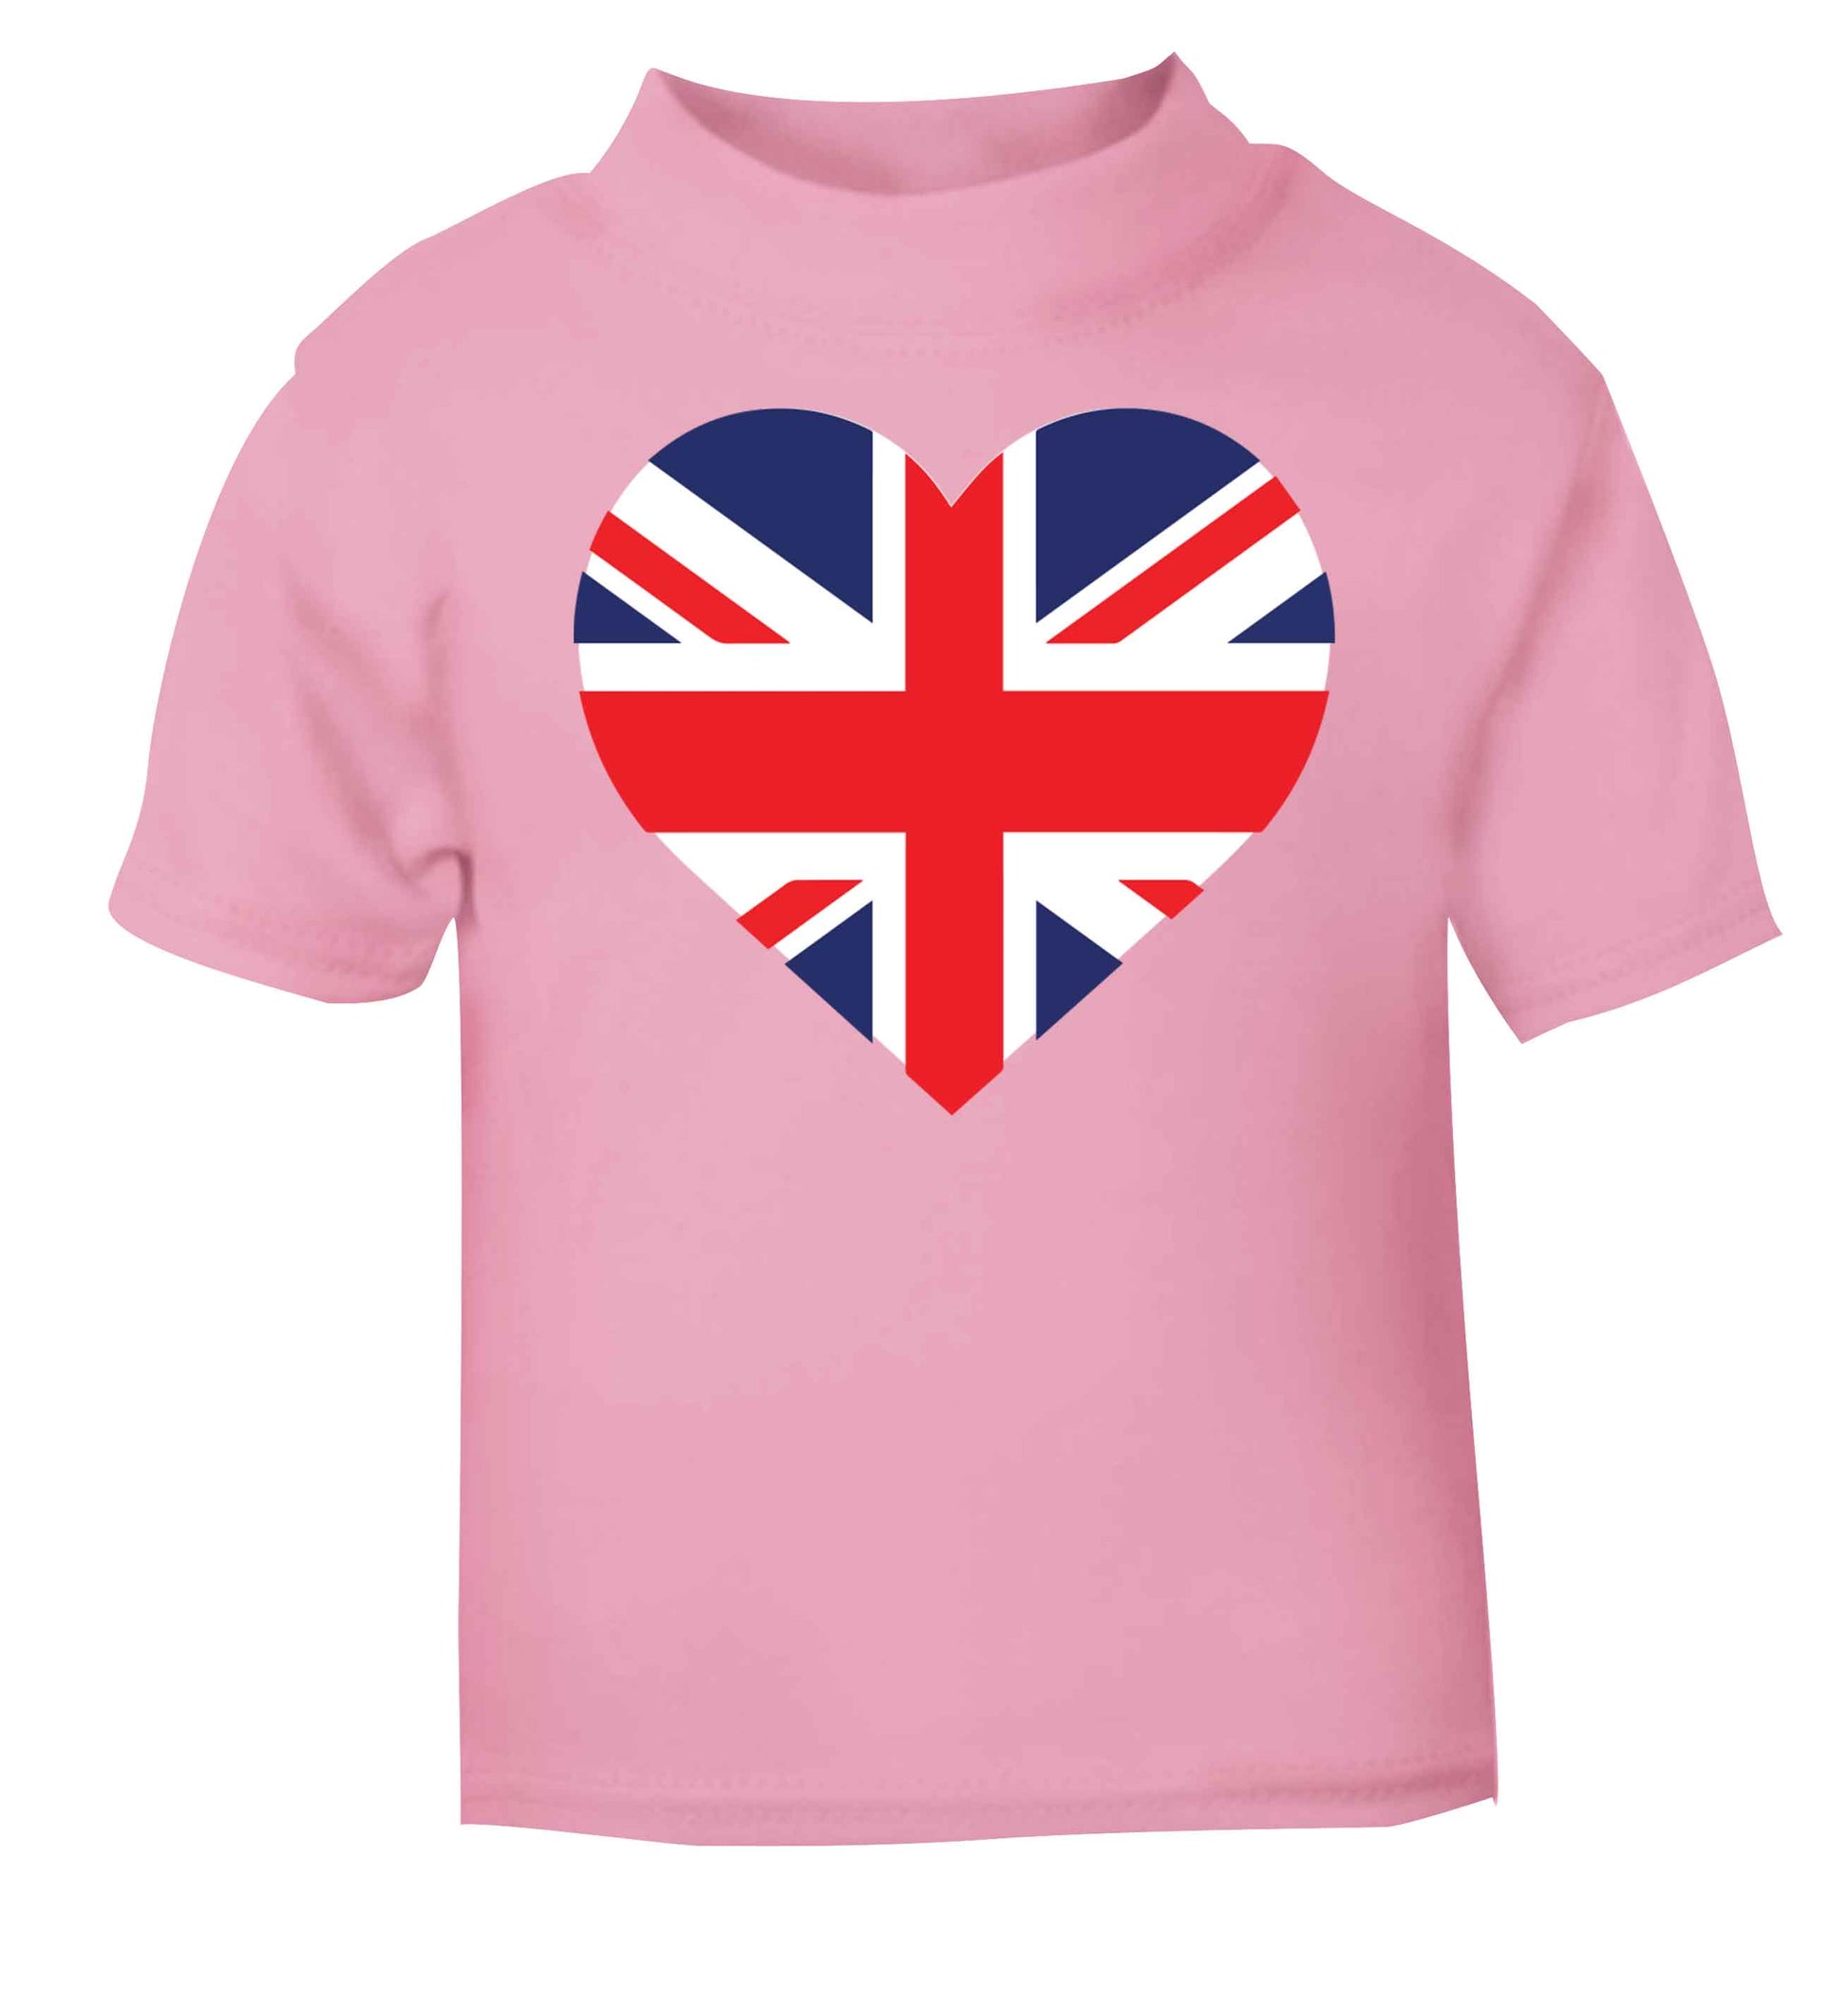 Union Jack Heart light pink baby toddler Tshirt 2 Years